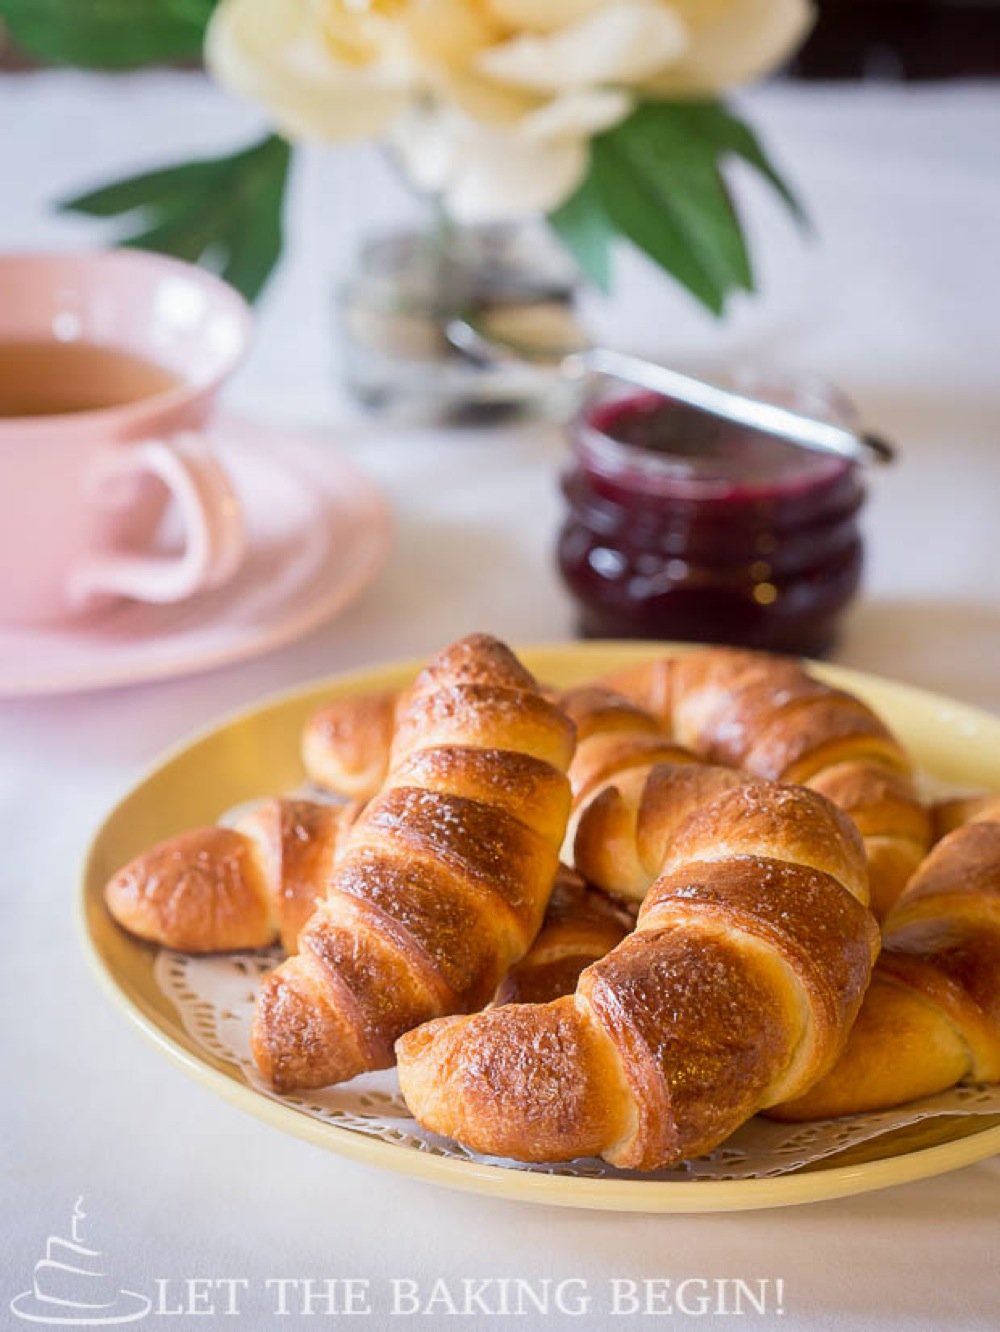 Crescents on a yellow decorative plate with jam and tea on a table.